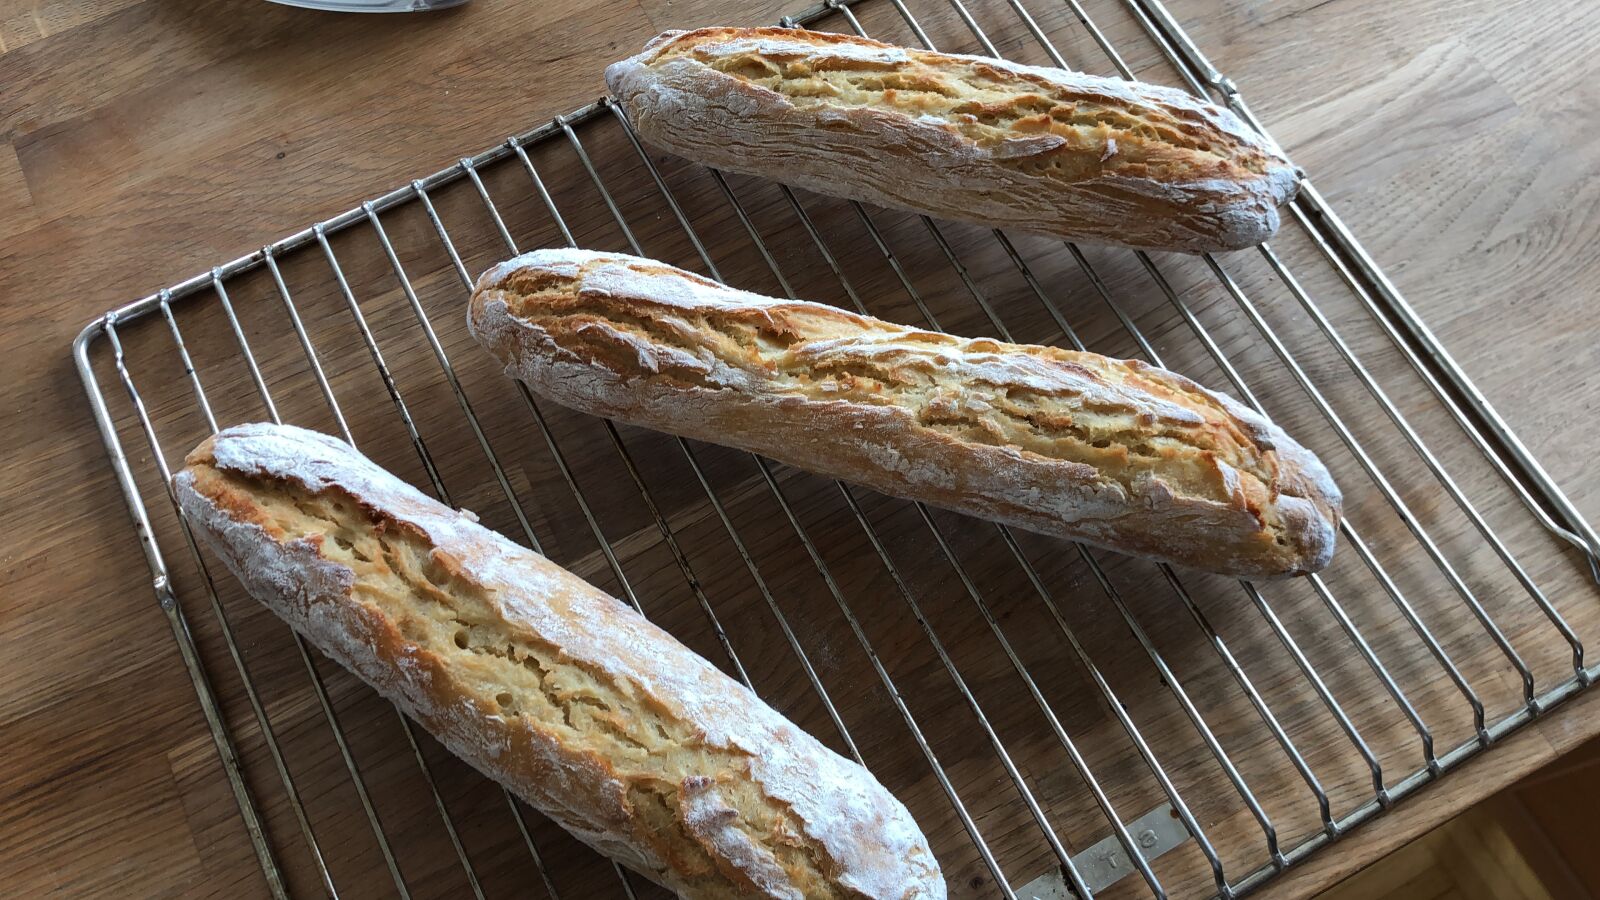 iPhone X back camera 4mm f/1.8 sample photo. Baguette, bake, baked goods photography